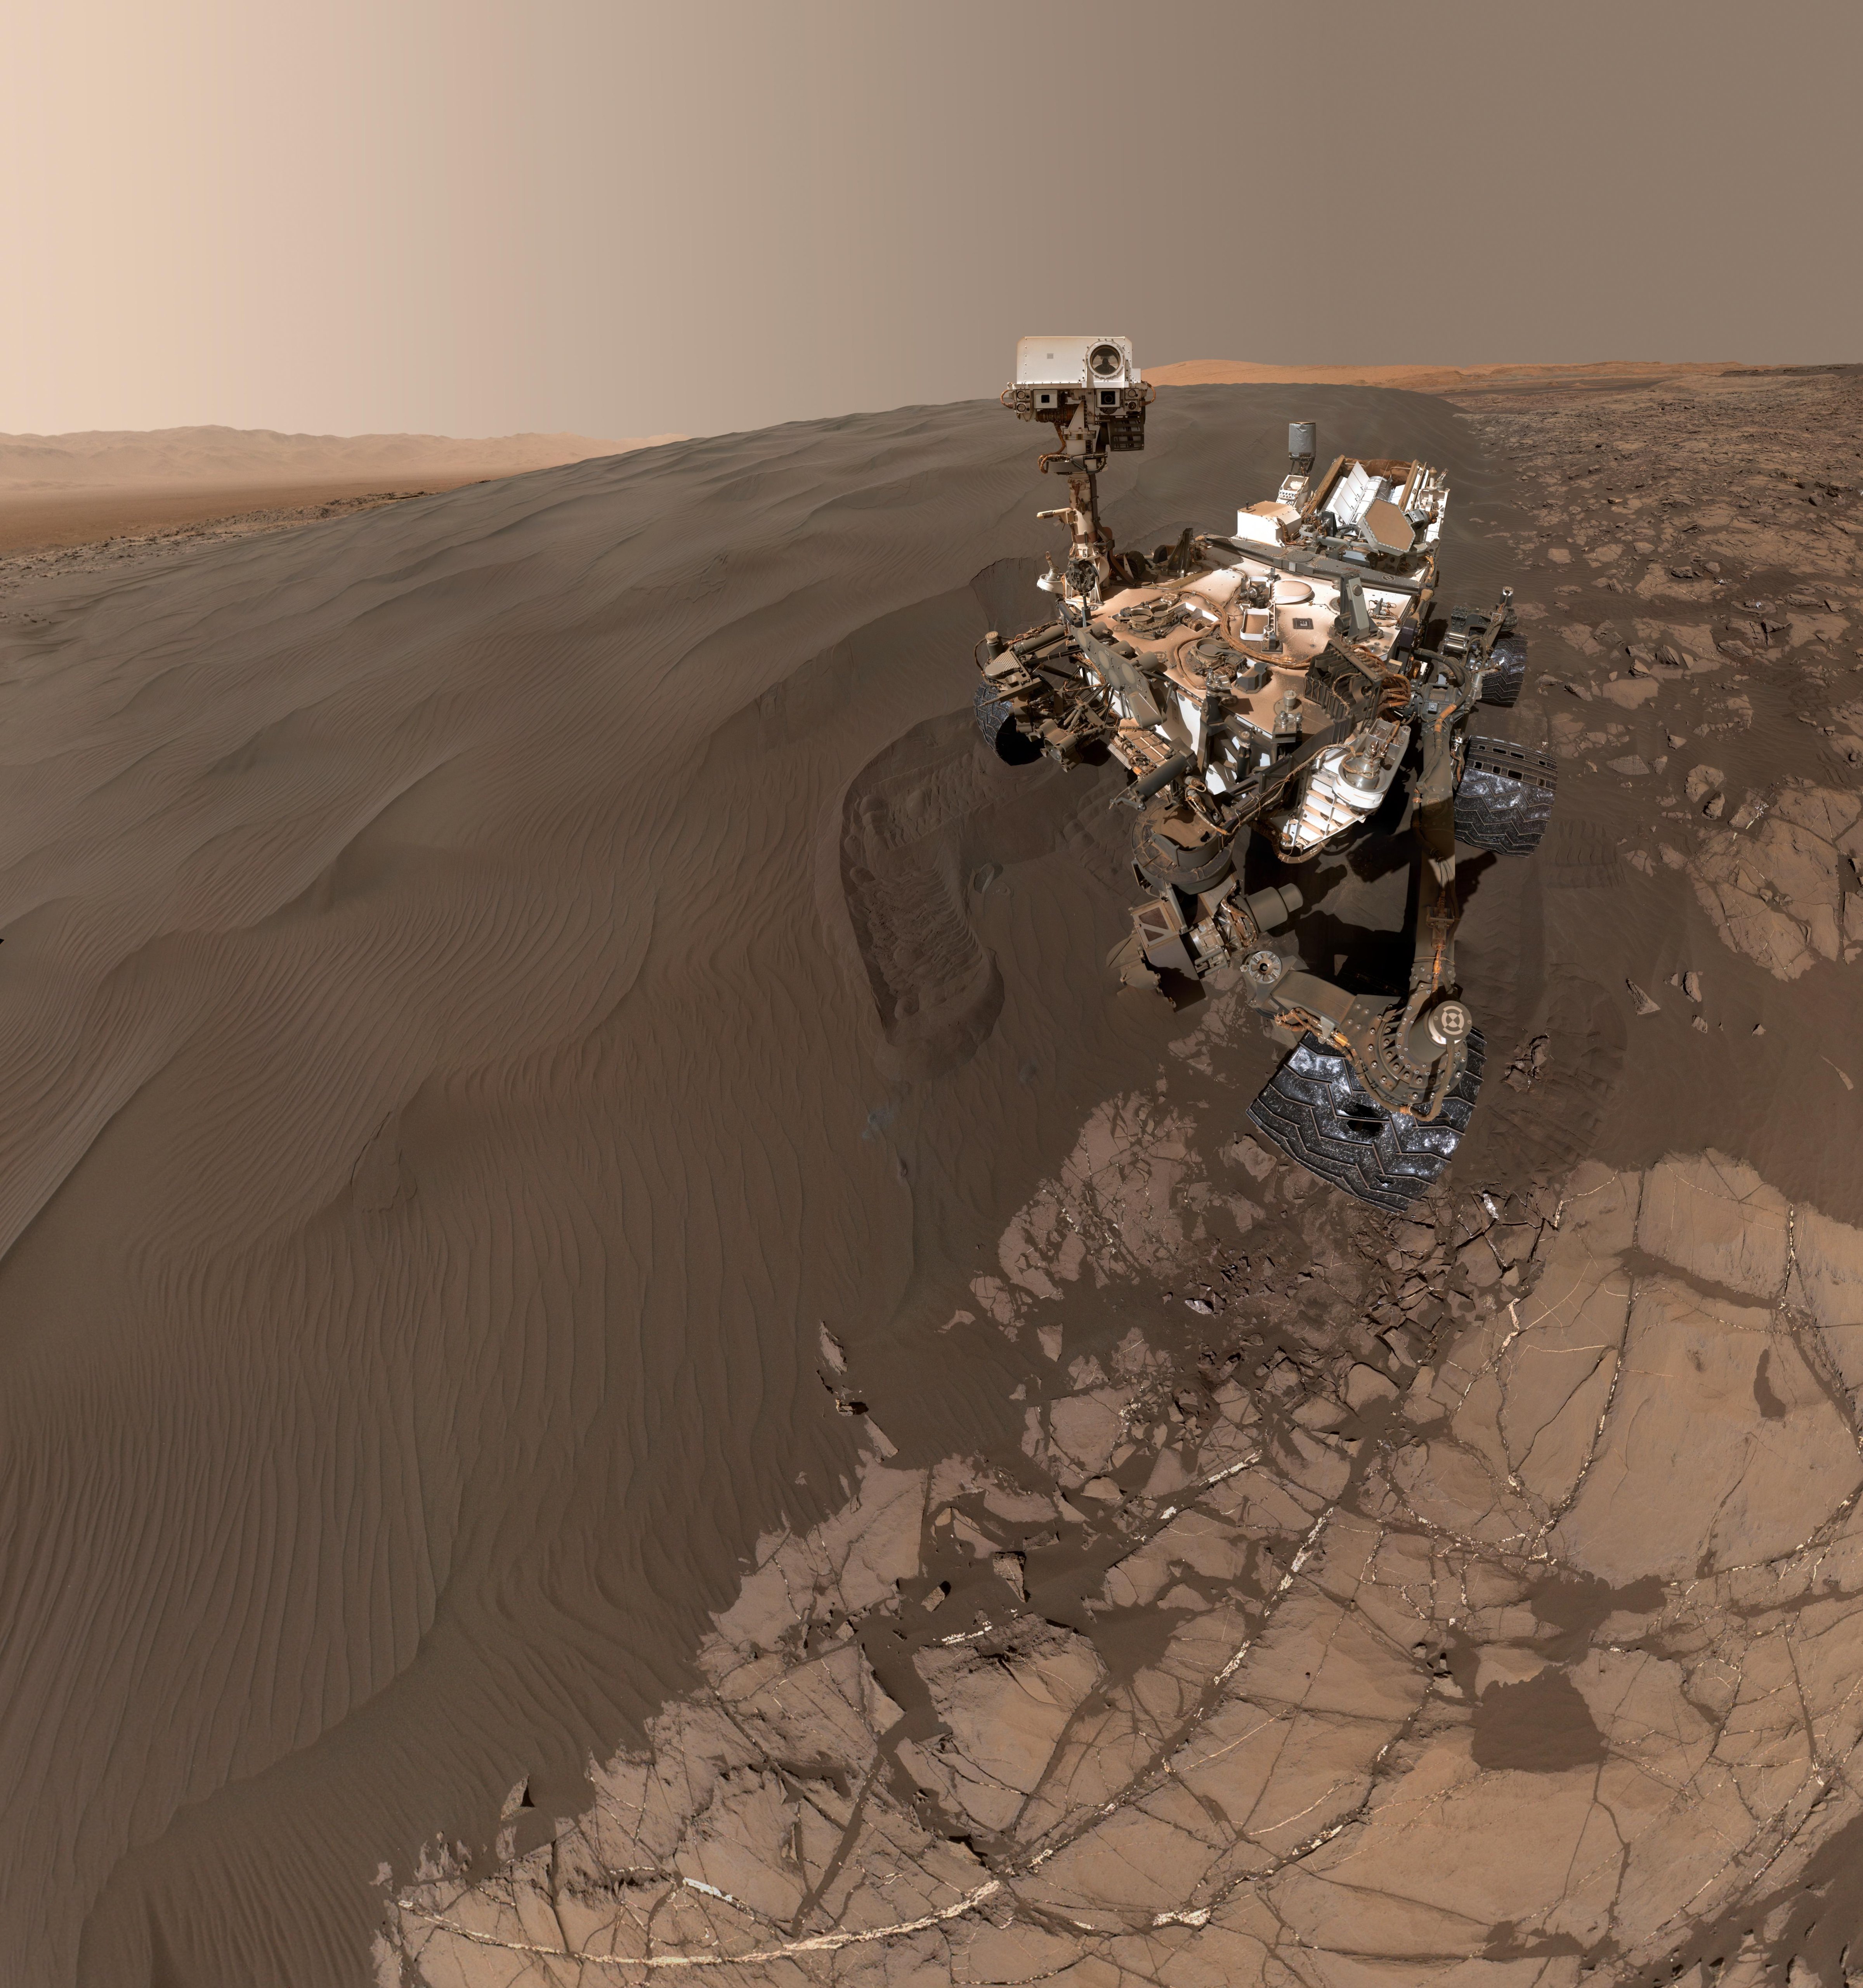 Glamour shot: The Curiosity rover at work on Mars's Bagnold Dune Field, on January 19, 2016